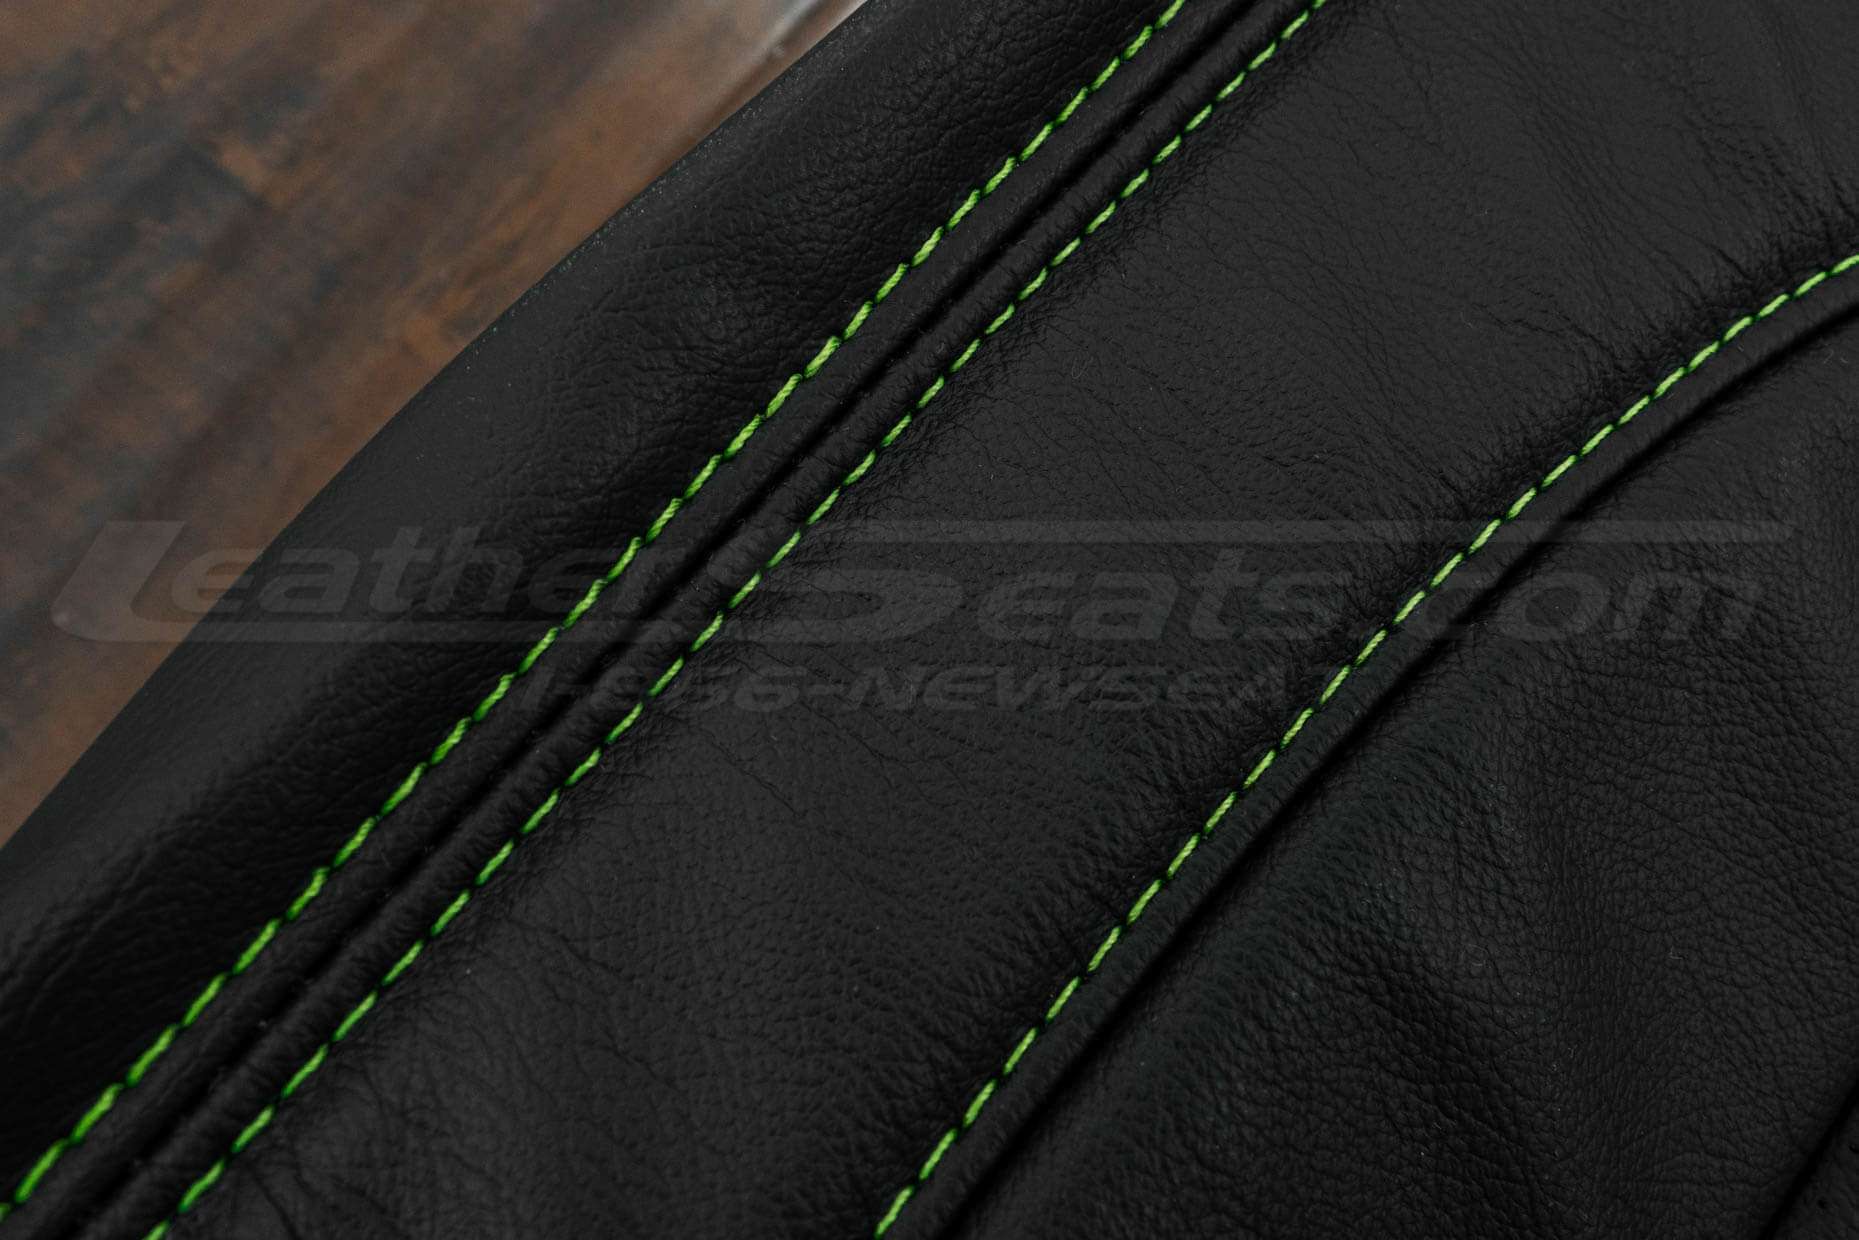 Double-stitching in Lime Green